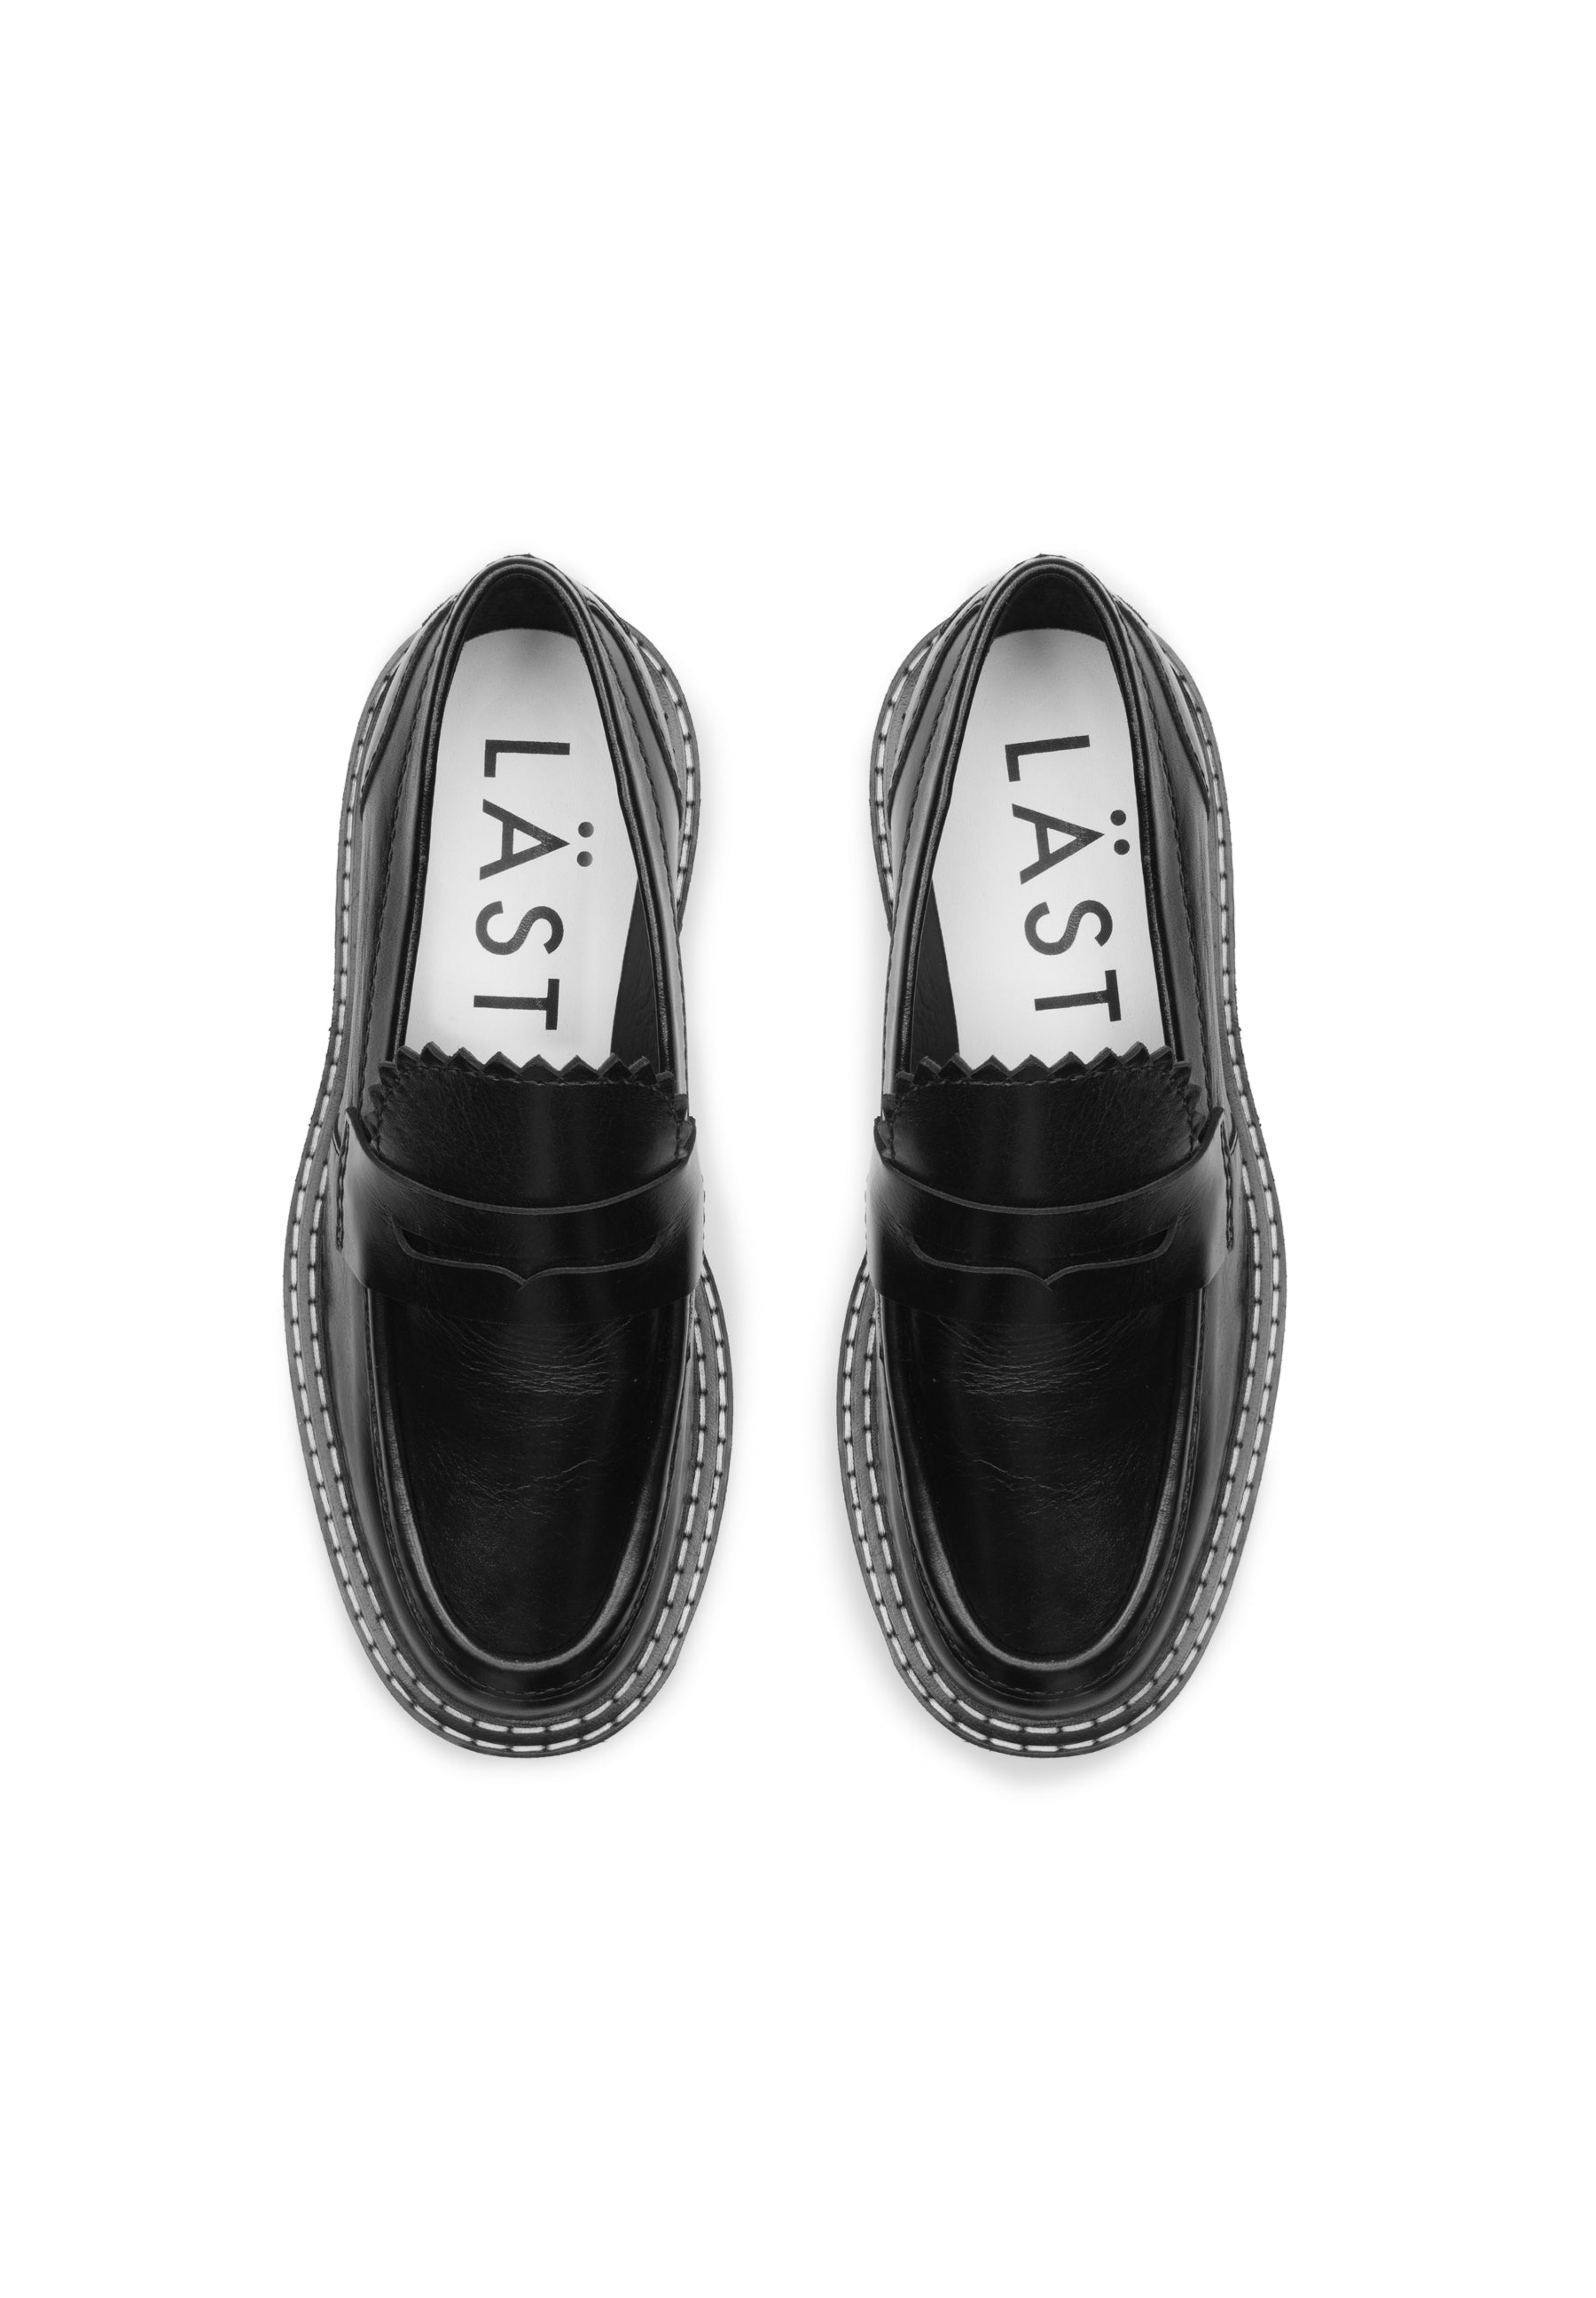 Matter Black Leather Loafers LAST1679 - 4